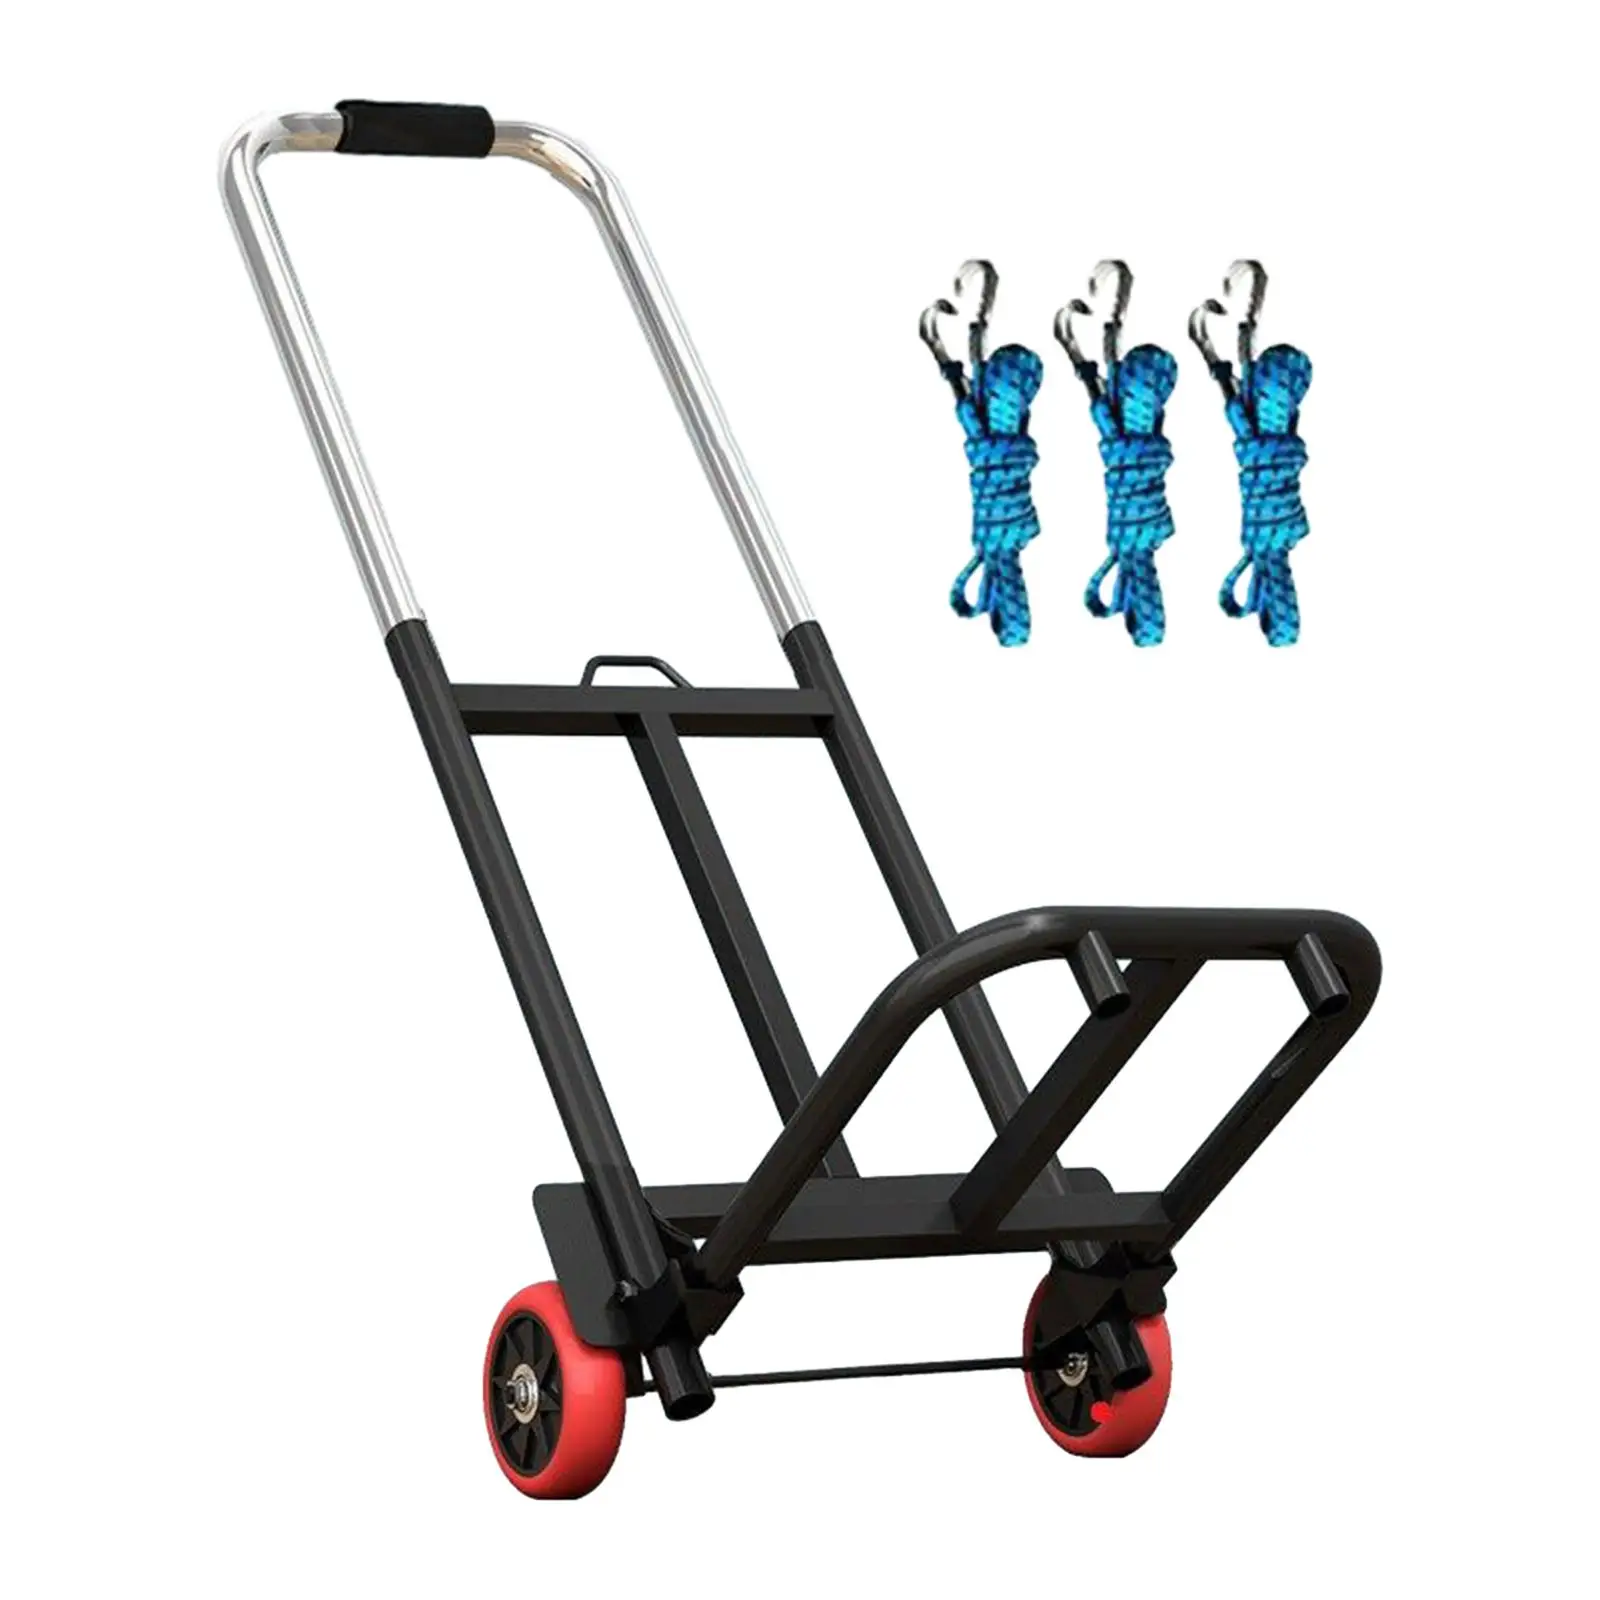 Folding Hand Truck Luggage Trolley Cart with 2 Wheels 27x40cm Platform Adjustable Handle for Outdoor, Personal, Travel Sturdy